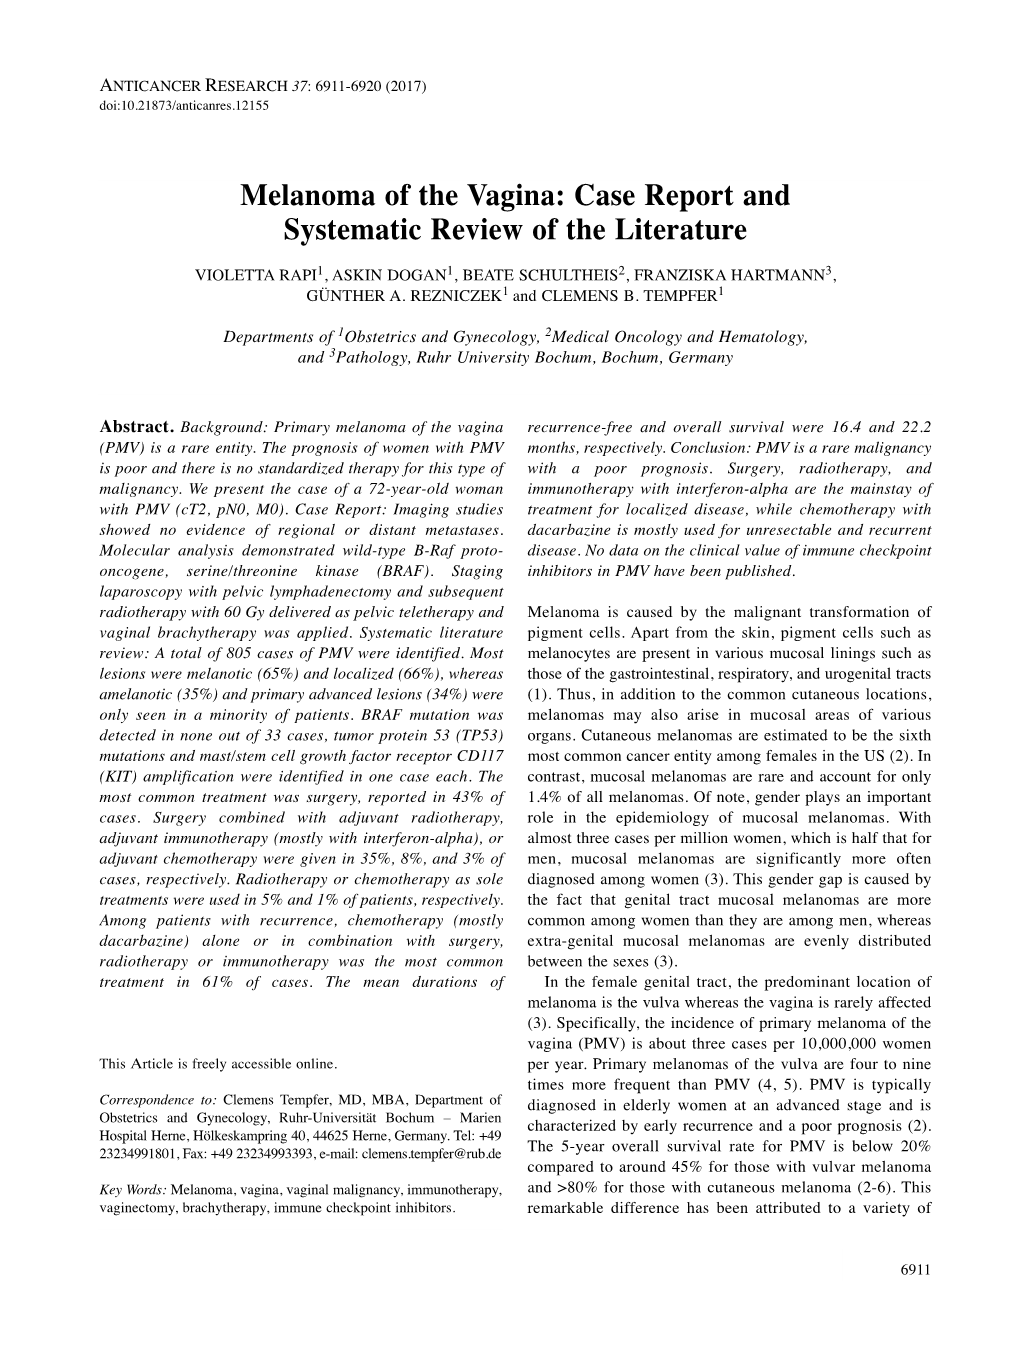 Melanoma of the Vagina: Case Report and Systematic Review of the Literature VIOLETTA RAPI 1, ASKIN DOGAN 1, BEATE SCHULTHEIS 2, FRANZISKA HARTMANN 3, GÜNTHER A